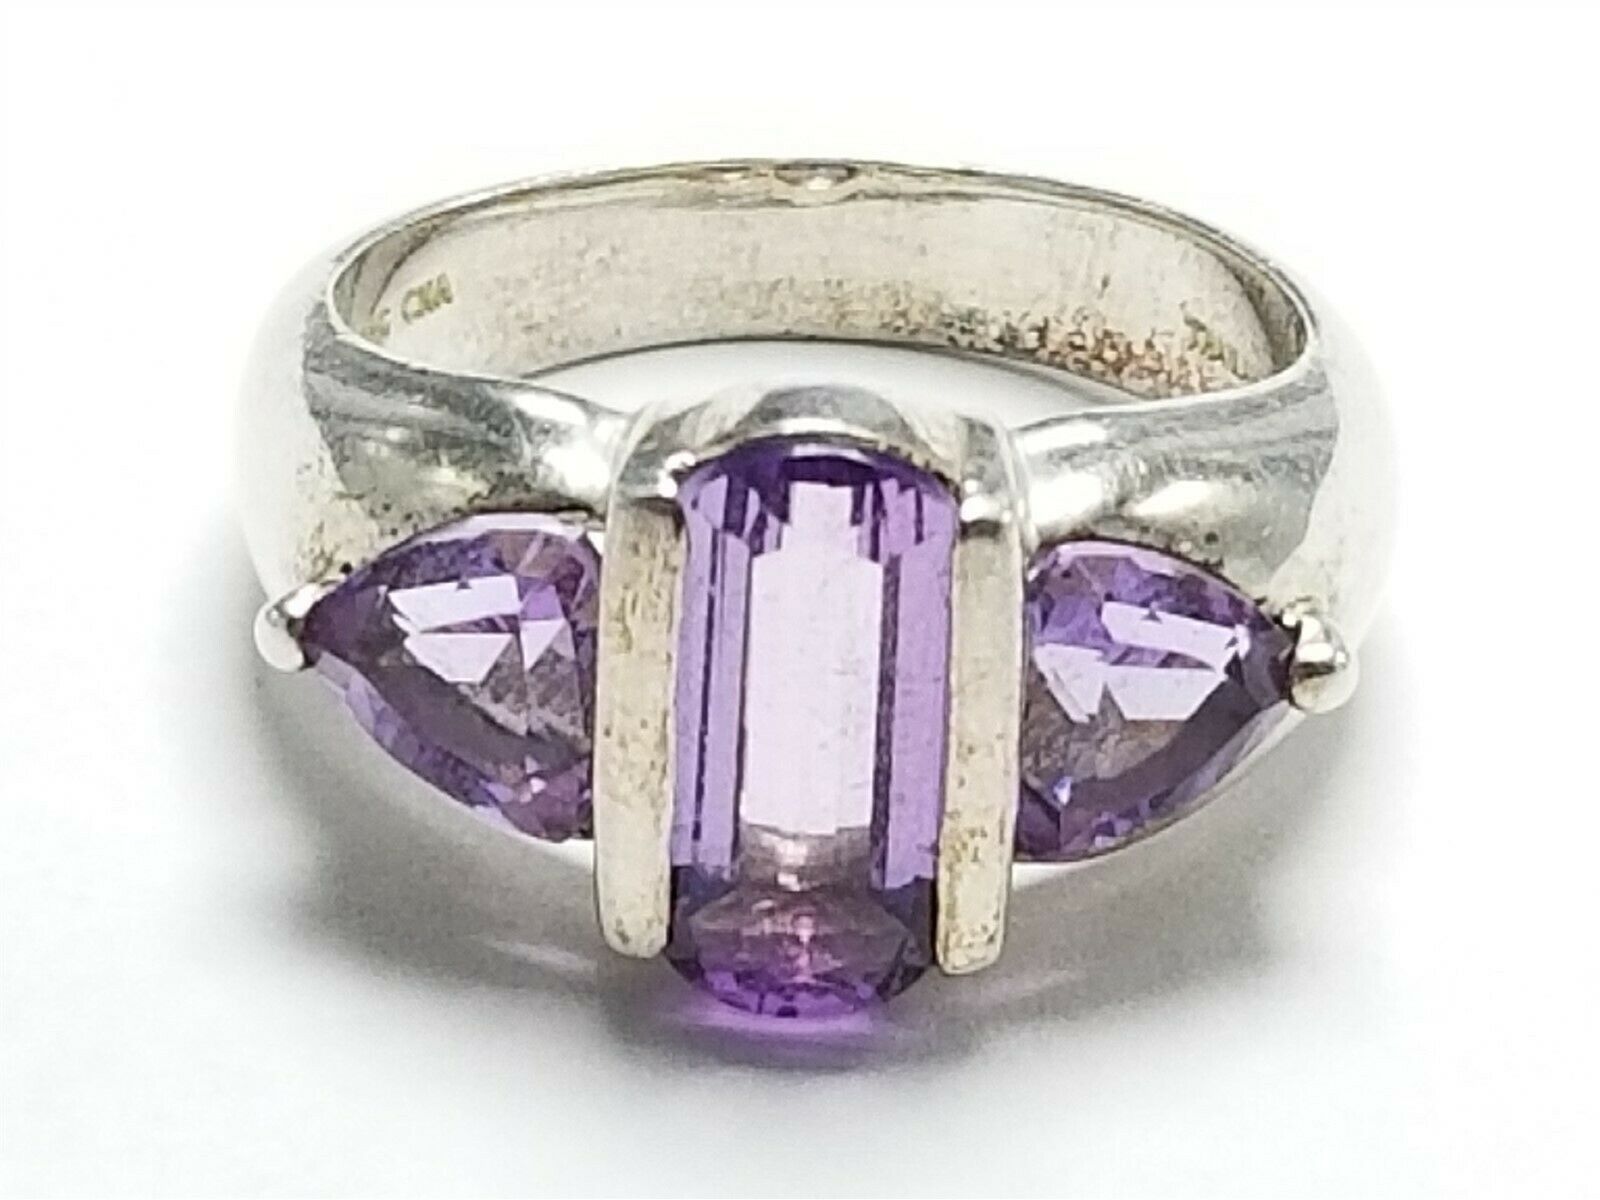 Women's Sterling Silver 925 Ring with Purple Stones #81818